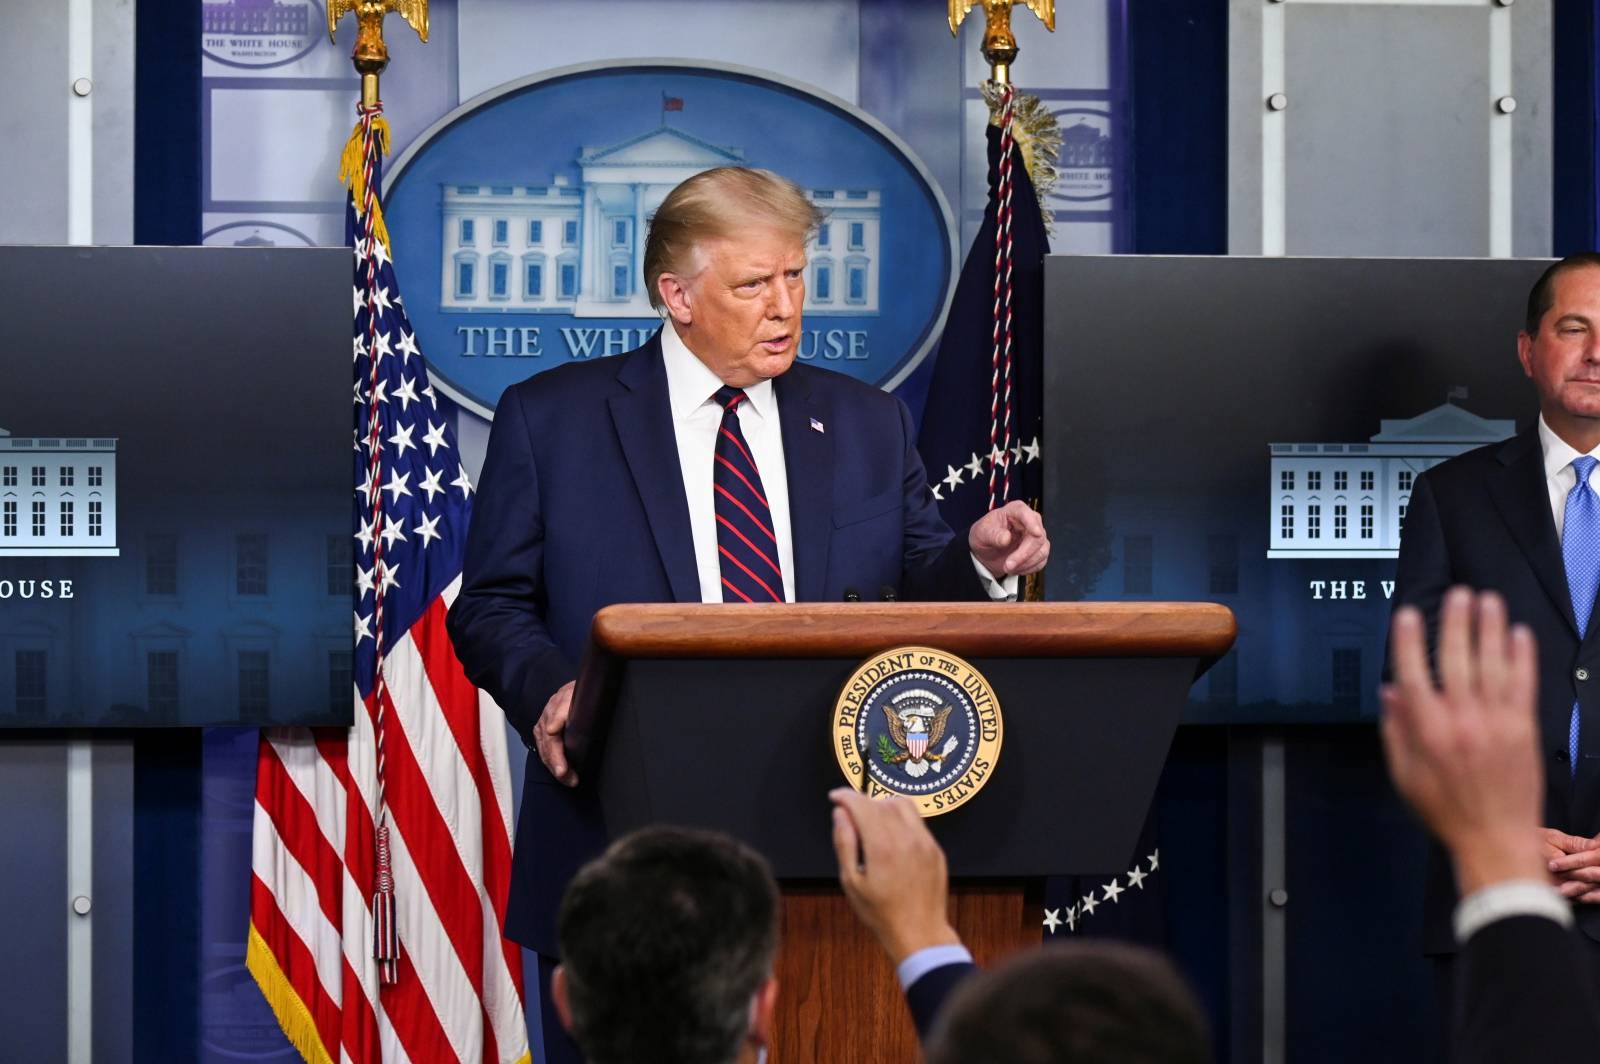 U.S. President Trump holds a news conference in Washington